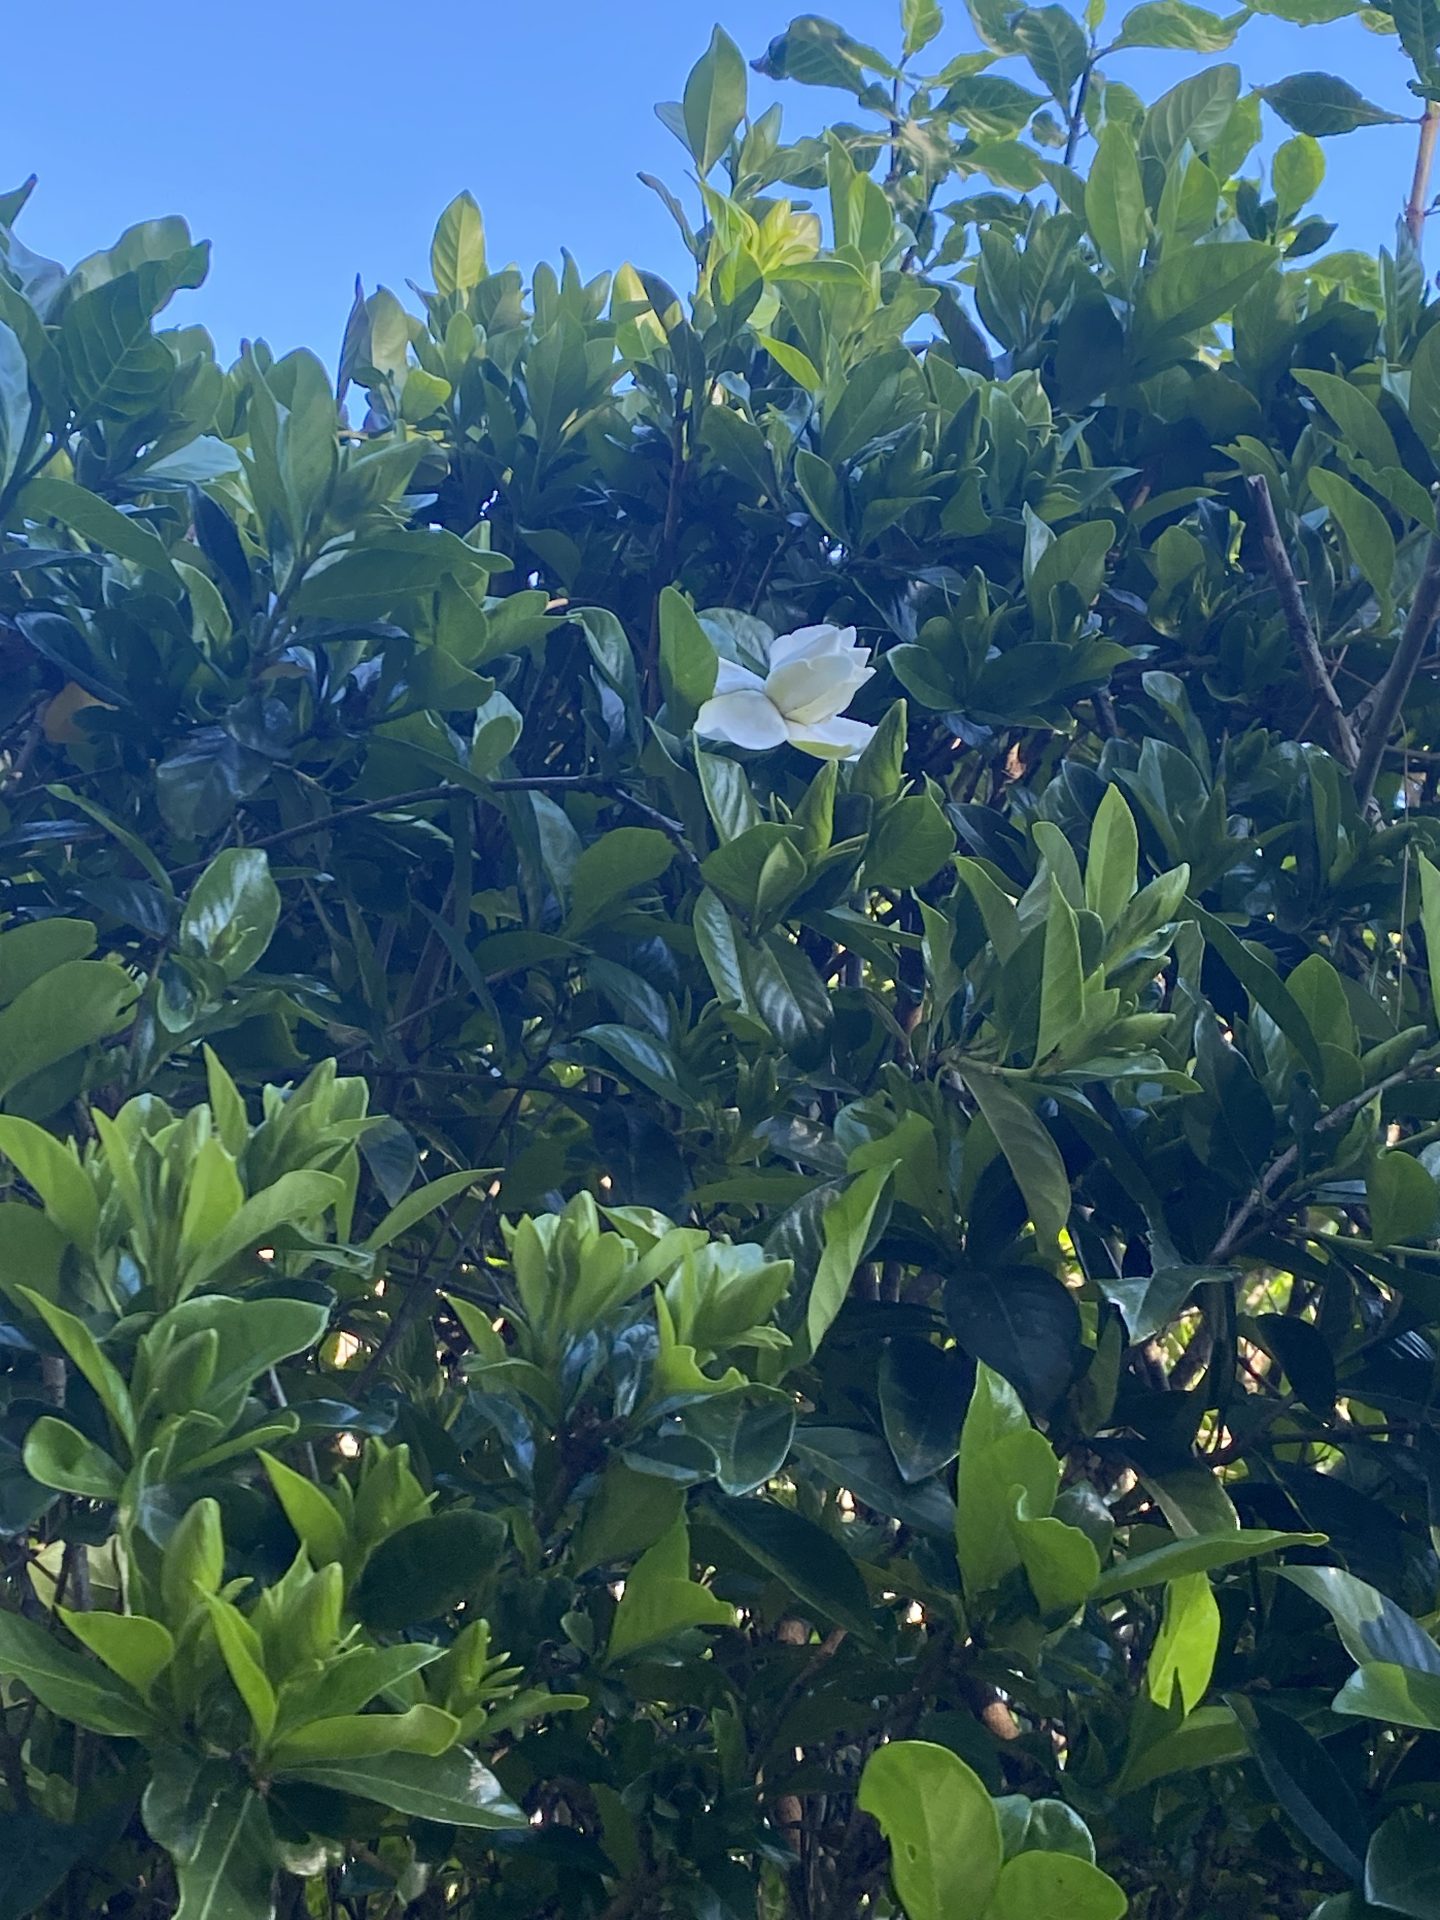 Hi Ed, wanted to share our first Gardenia with you for this year.  Also we got a pineapple growing.  Thinking of you & miss you sooo much.<br />
Love you. ❤️